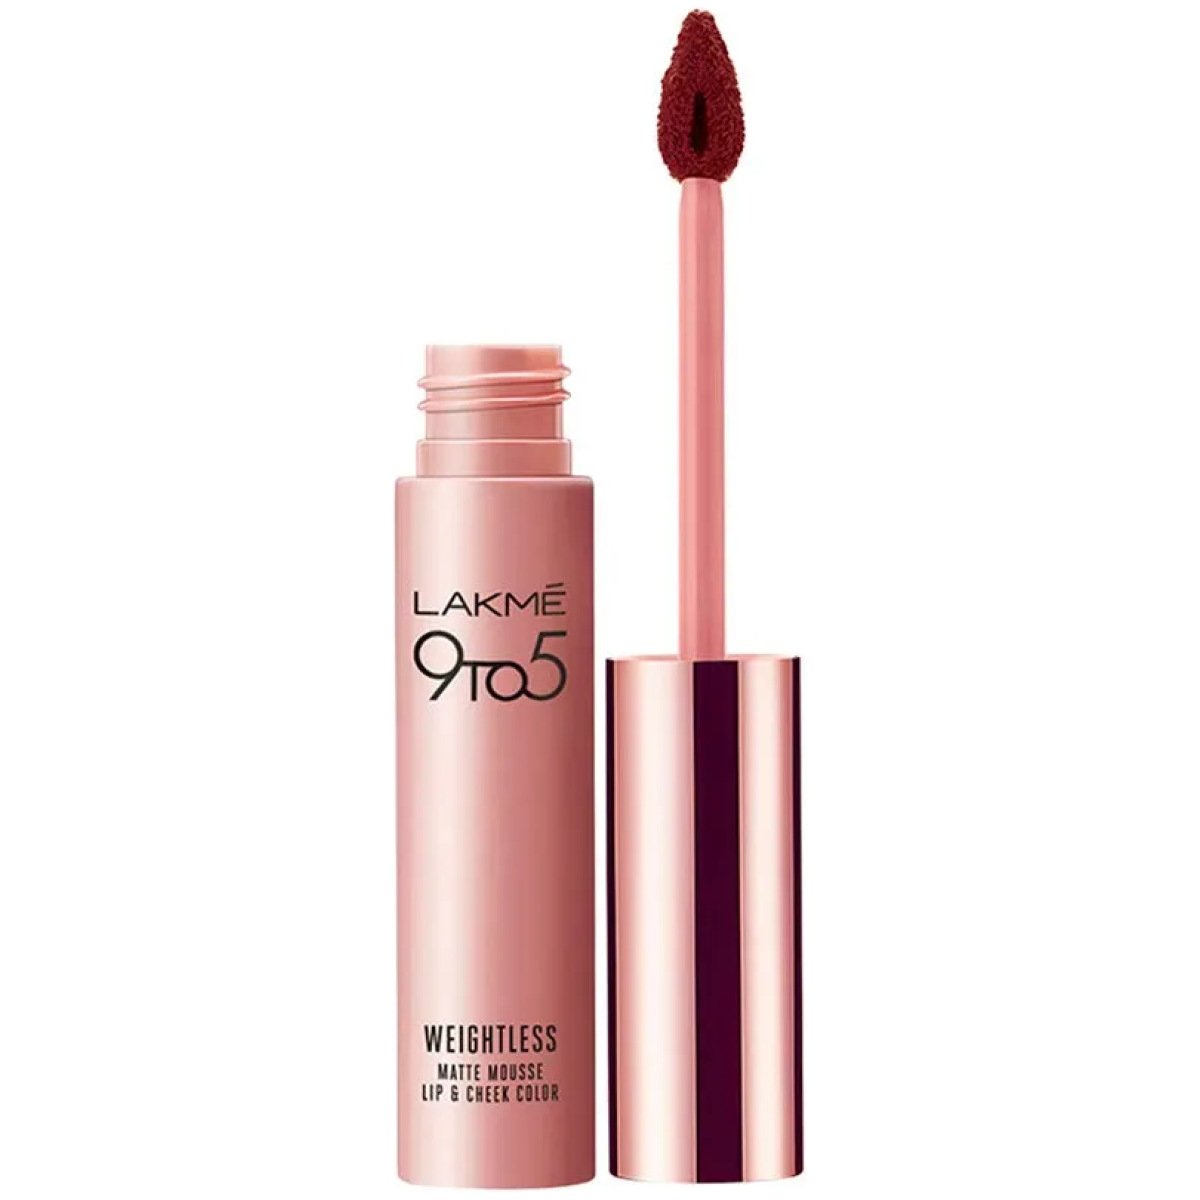 Lakme 9 to 5 Weightless Lip & Cheek Color, Chocolate Mousse 9 g